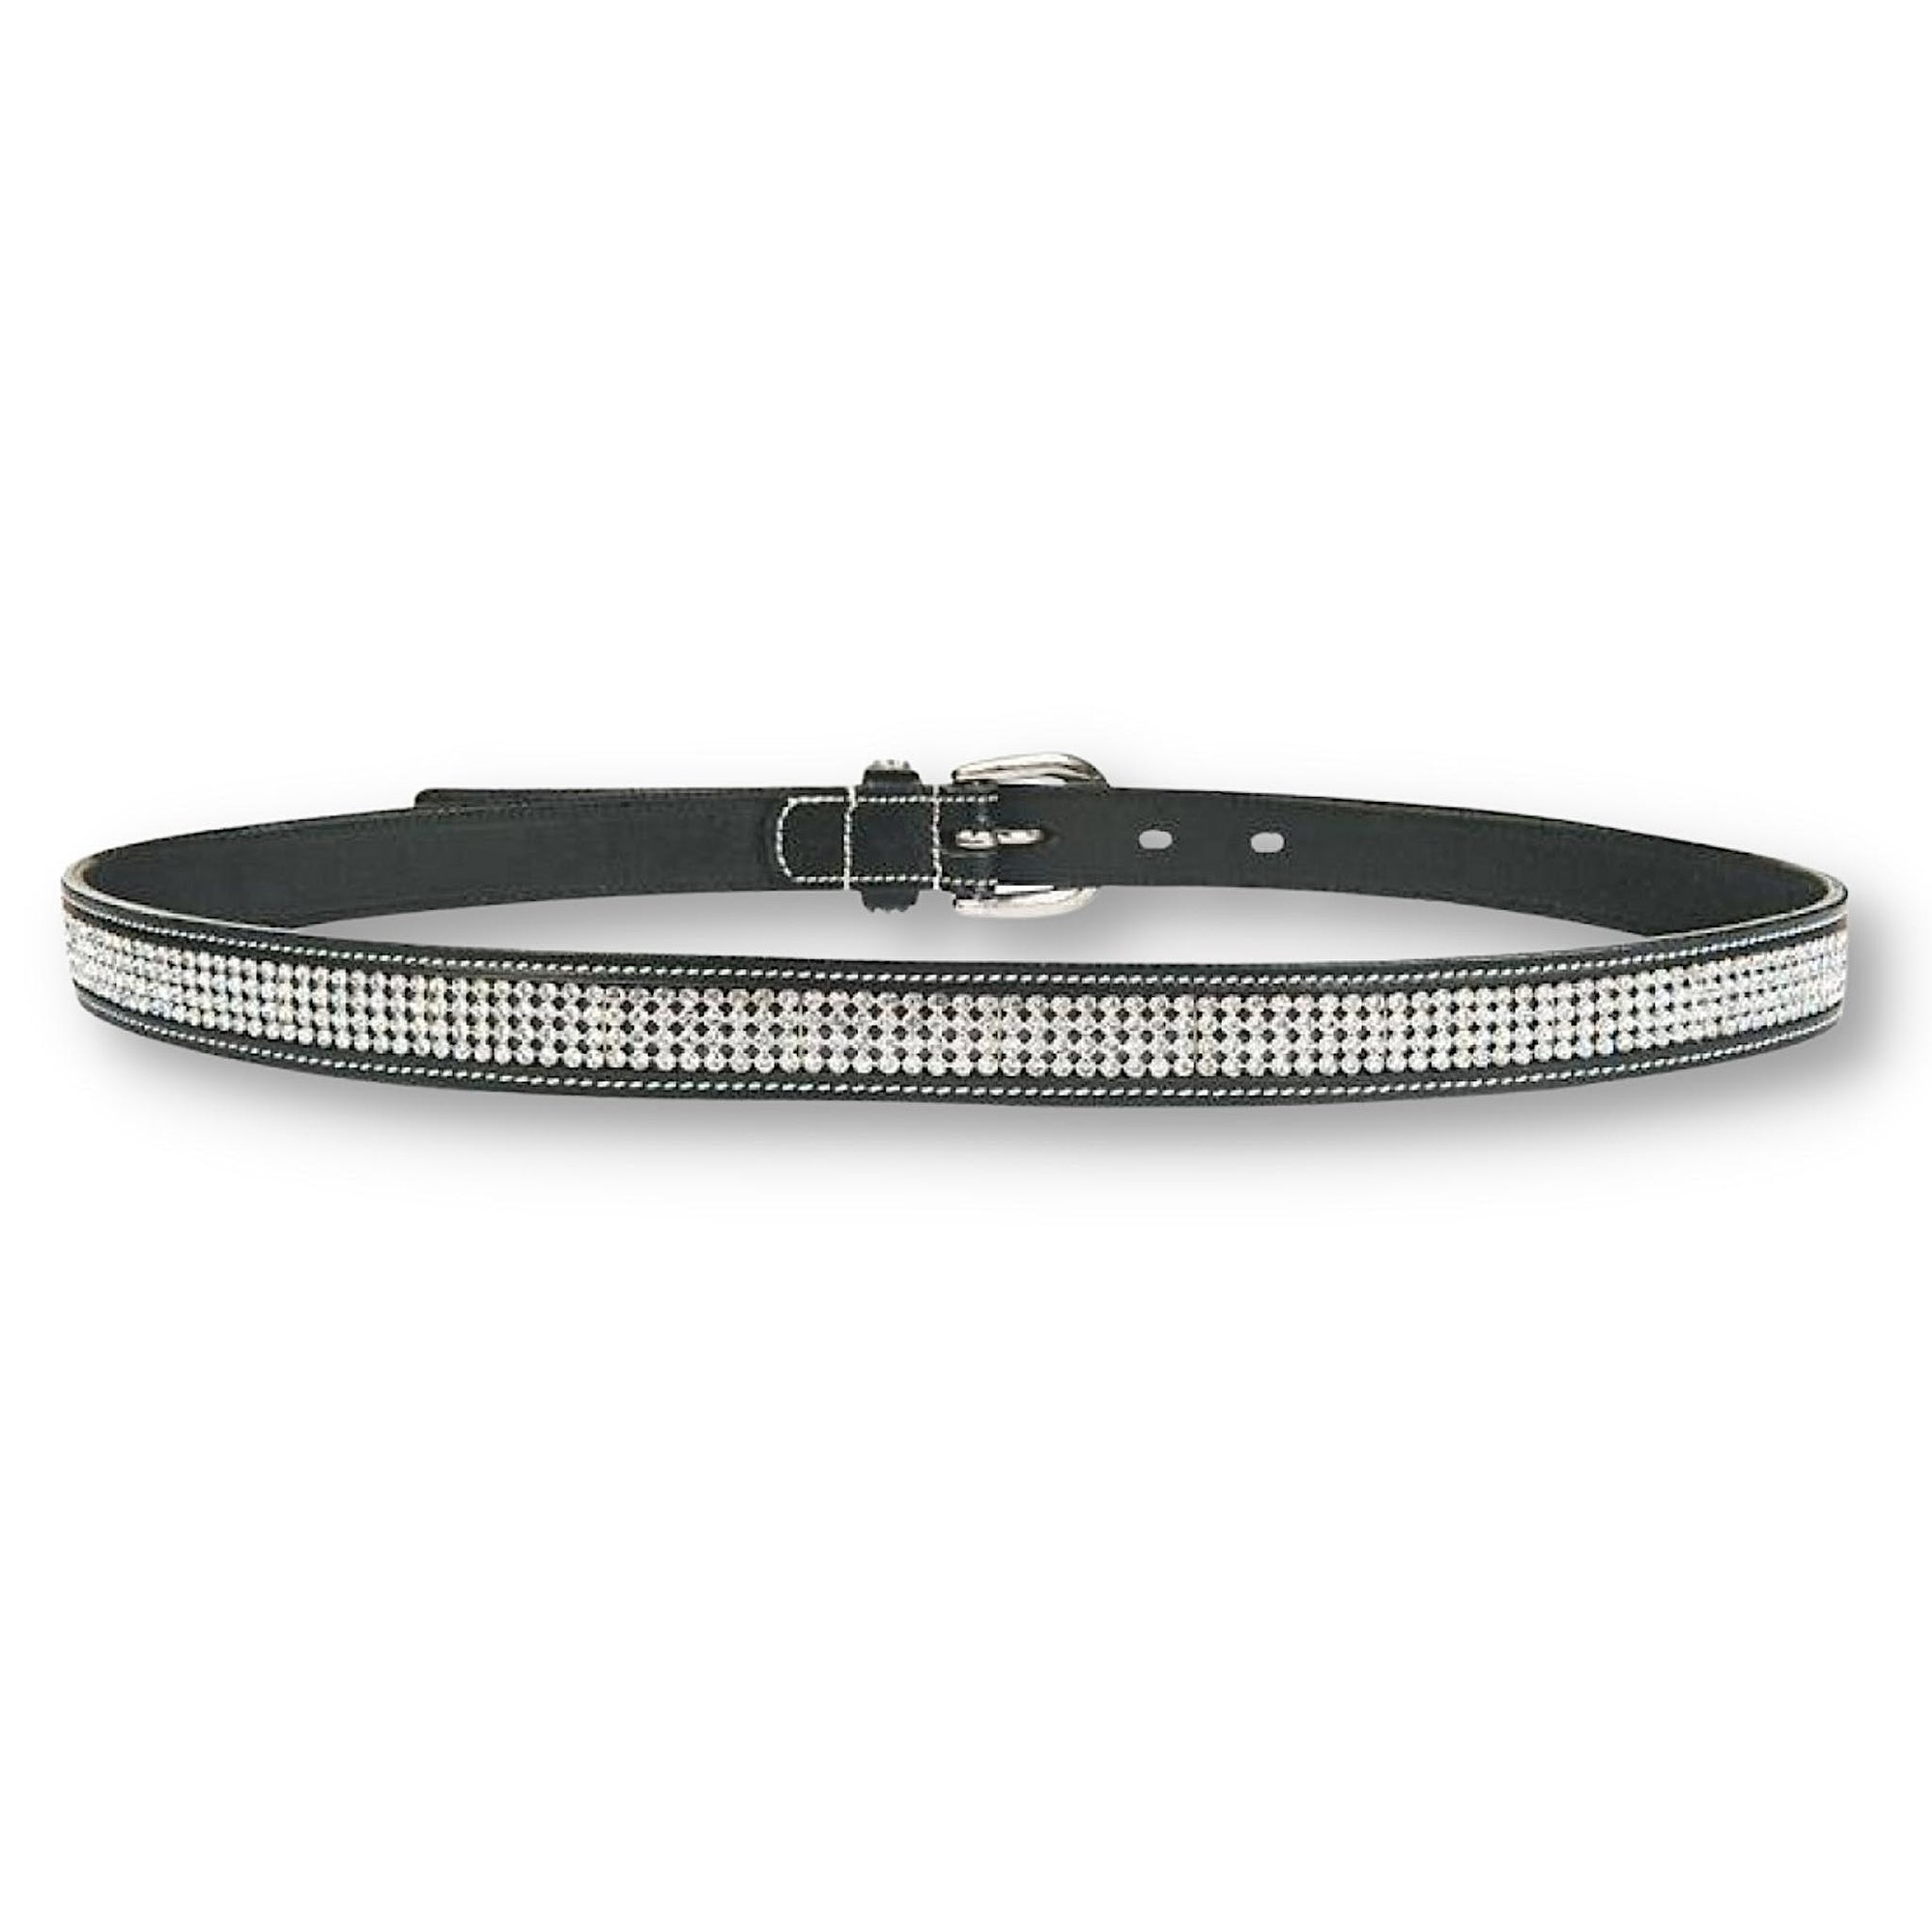 Front of black leather belt with diamante buckle and rows of diamantes.